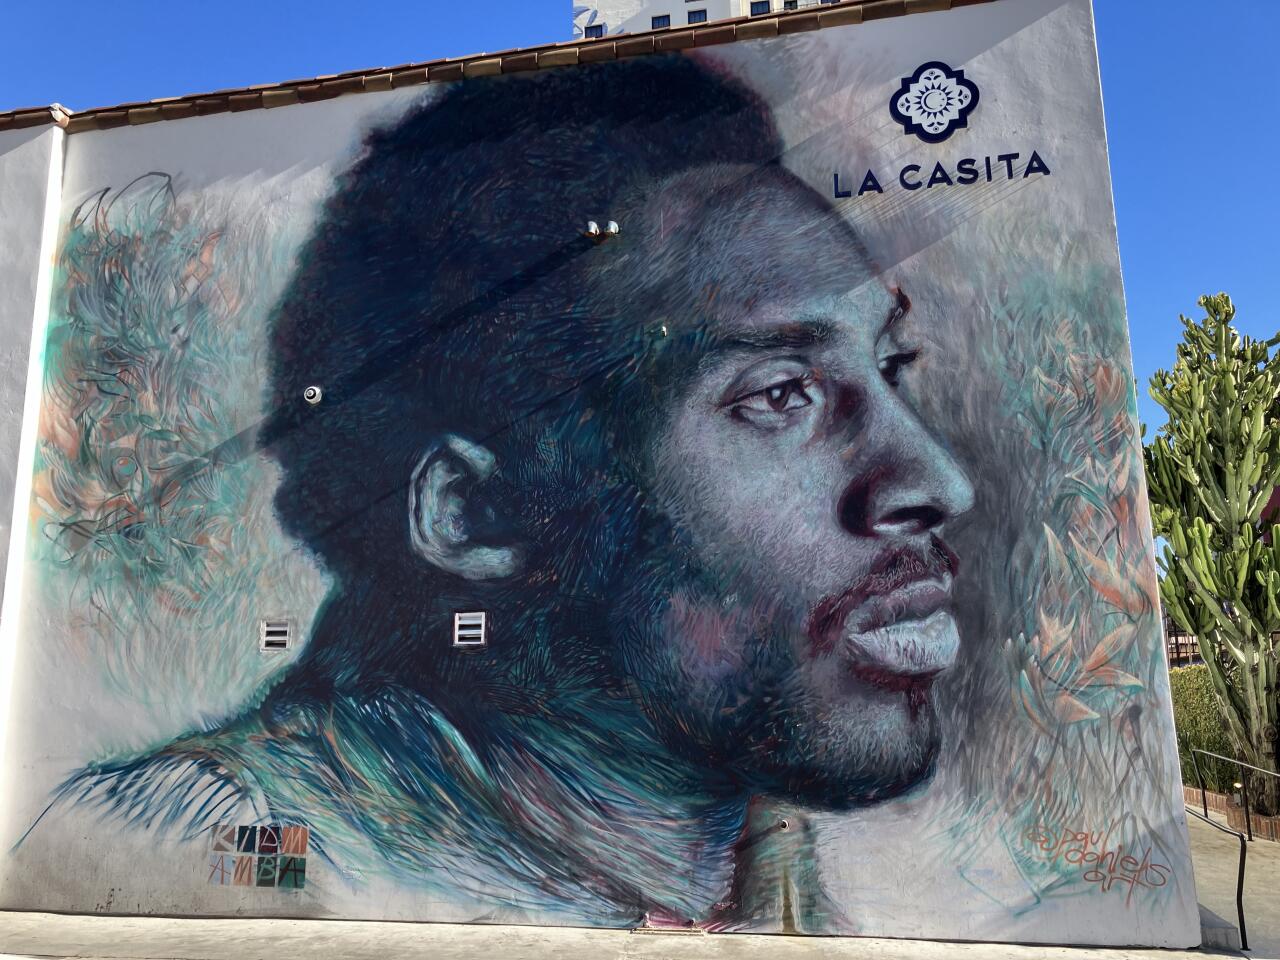 A mural honors Kobe Bryant on the La Casita building in downtown Los Angeles.